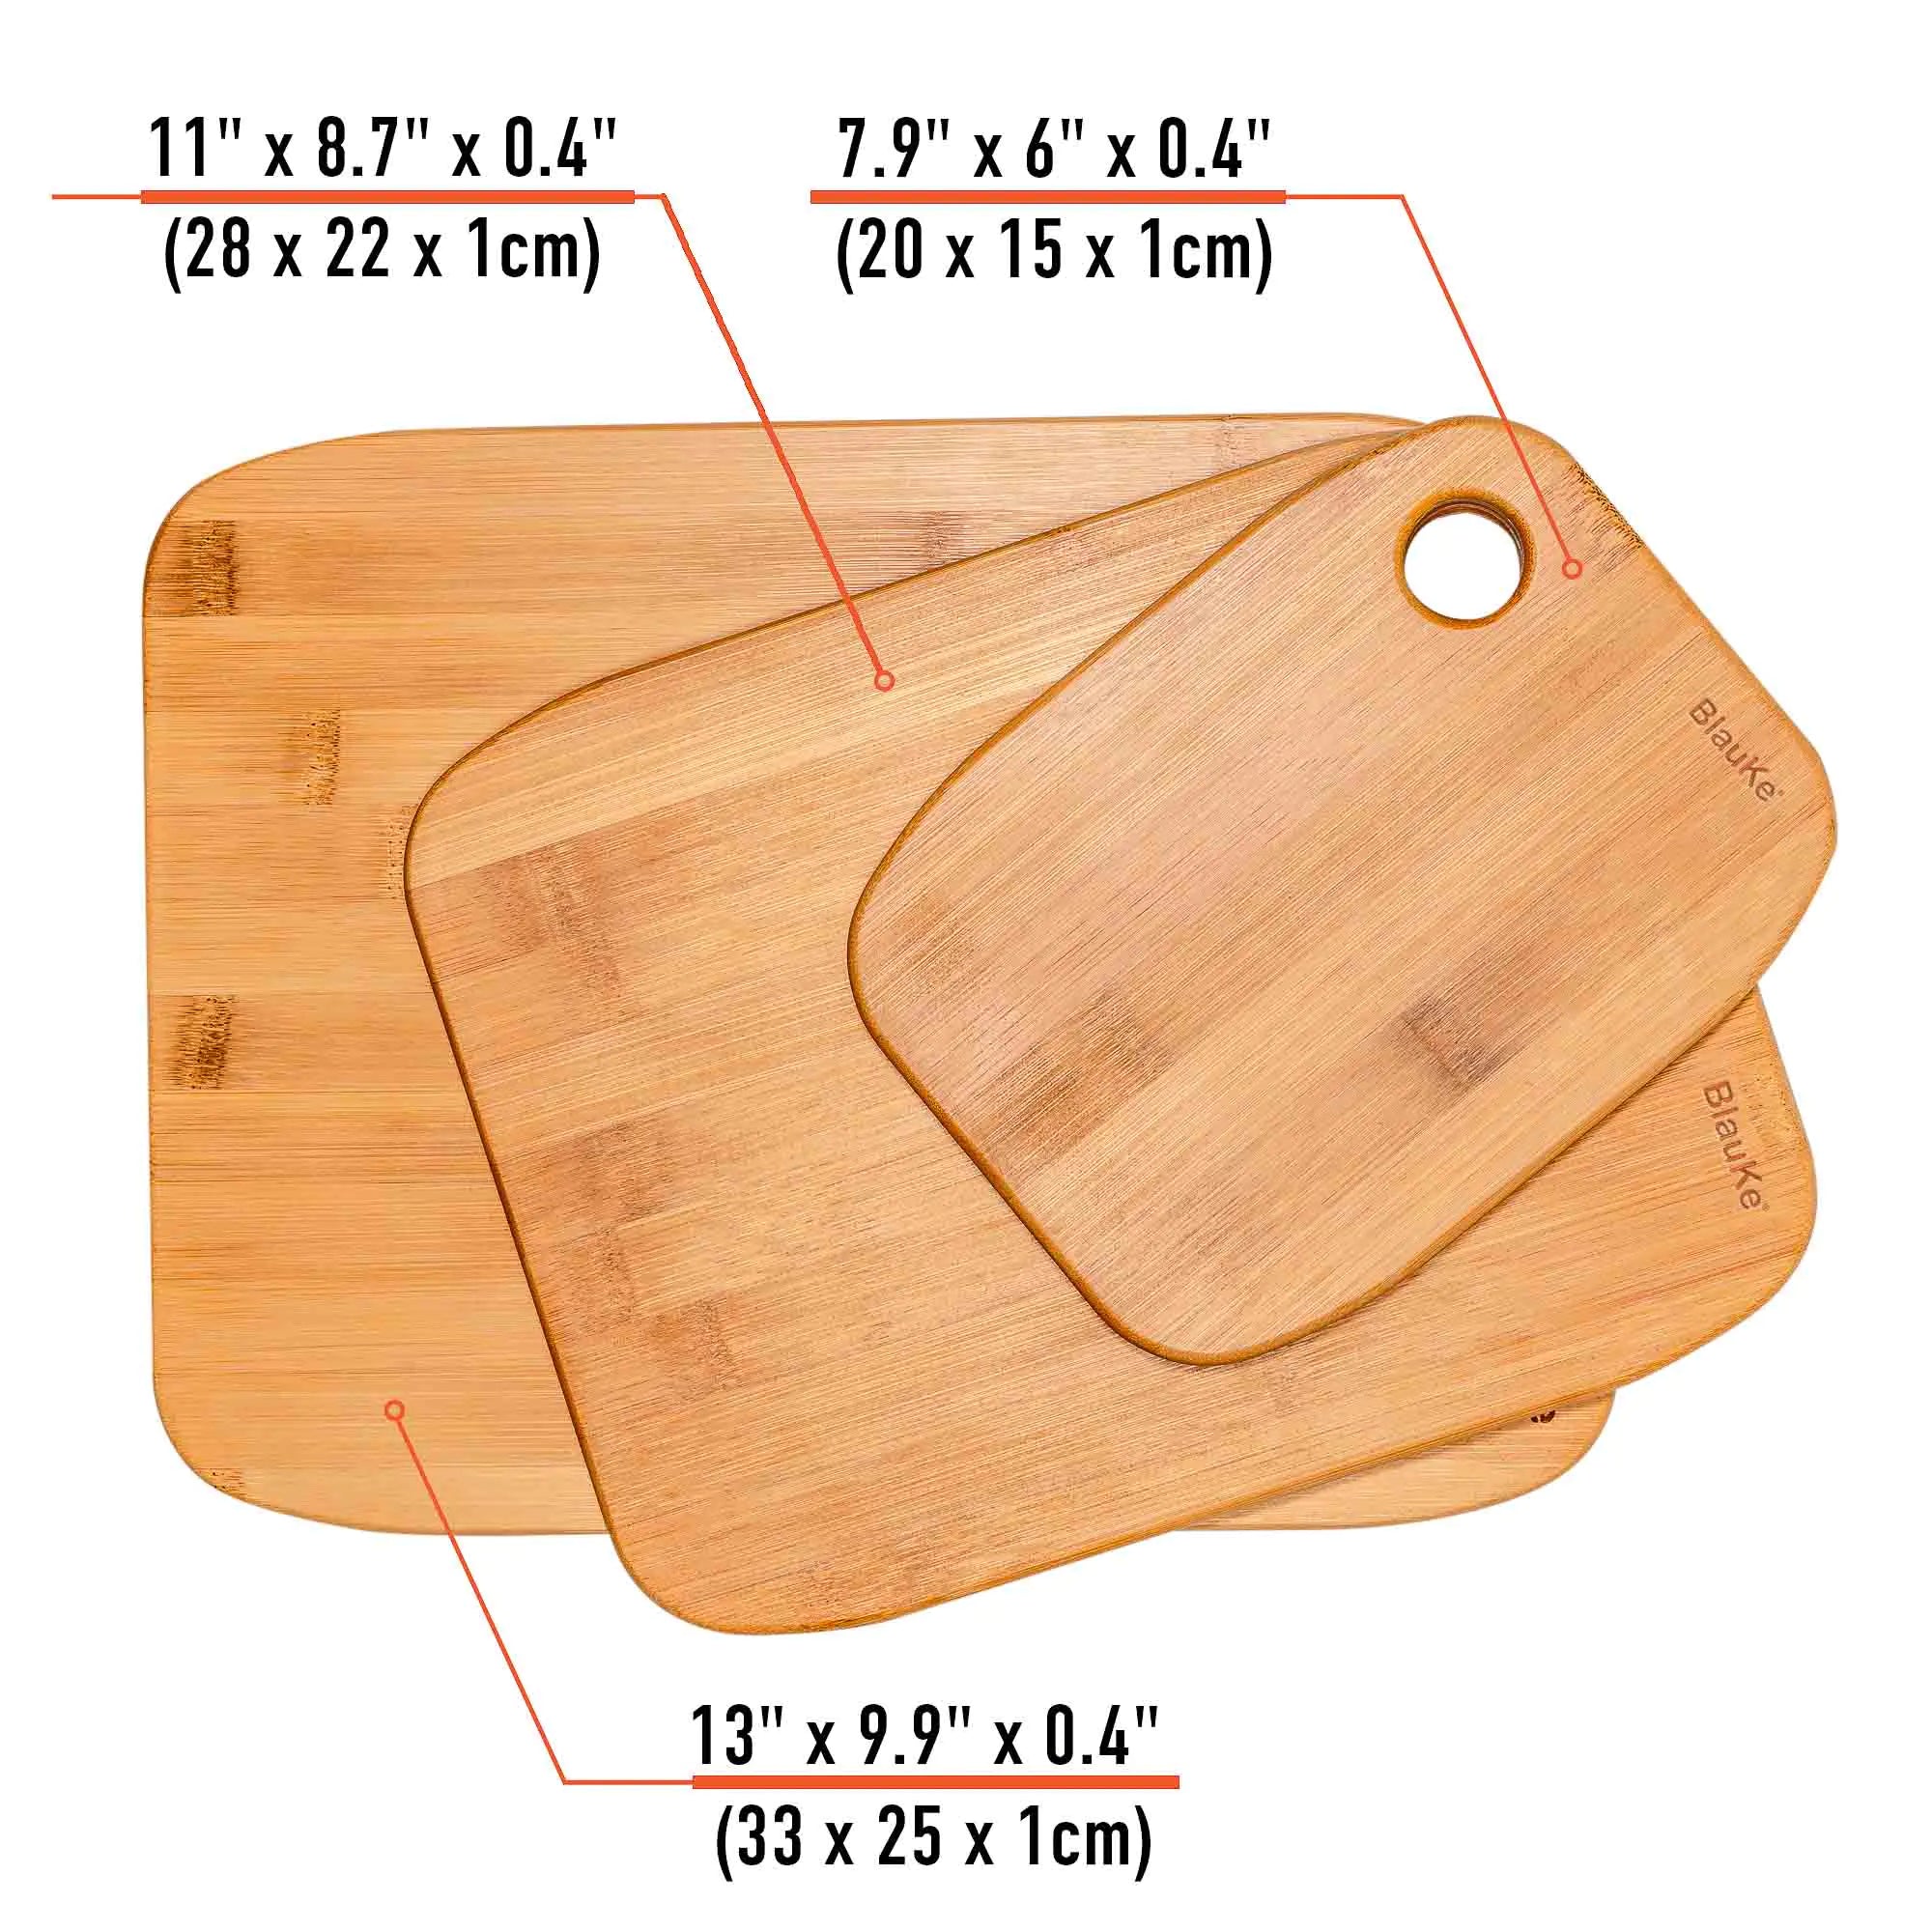 Wooden Cutting Boards for Kitchen - Bamboo Chopping Board Set of 3 - Assortique. Inc